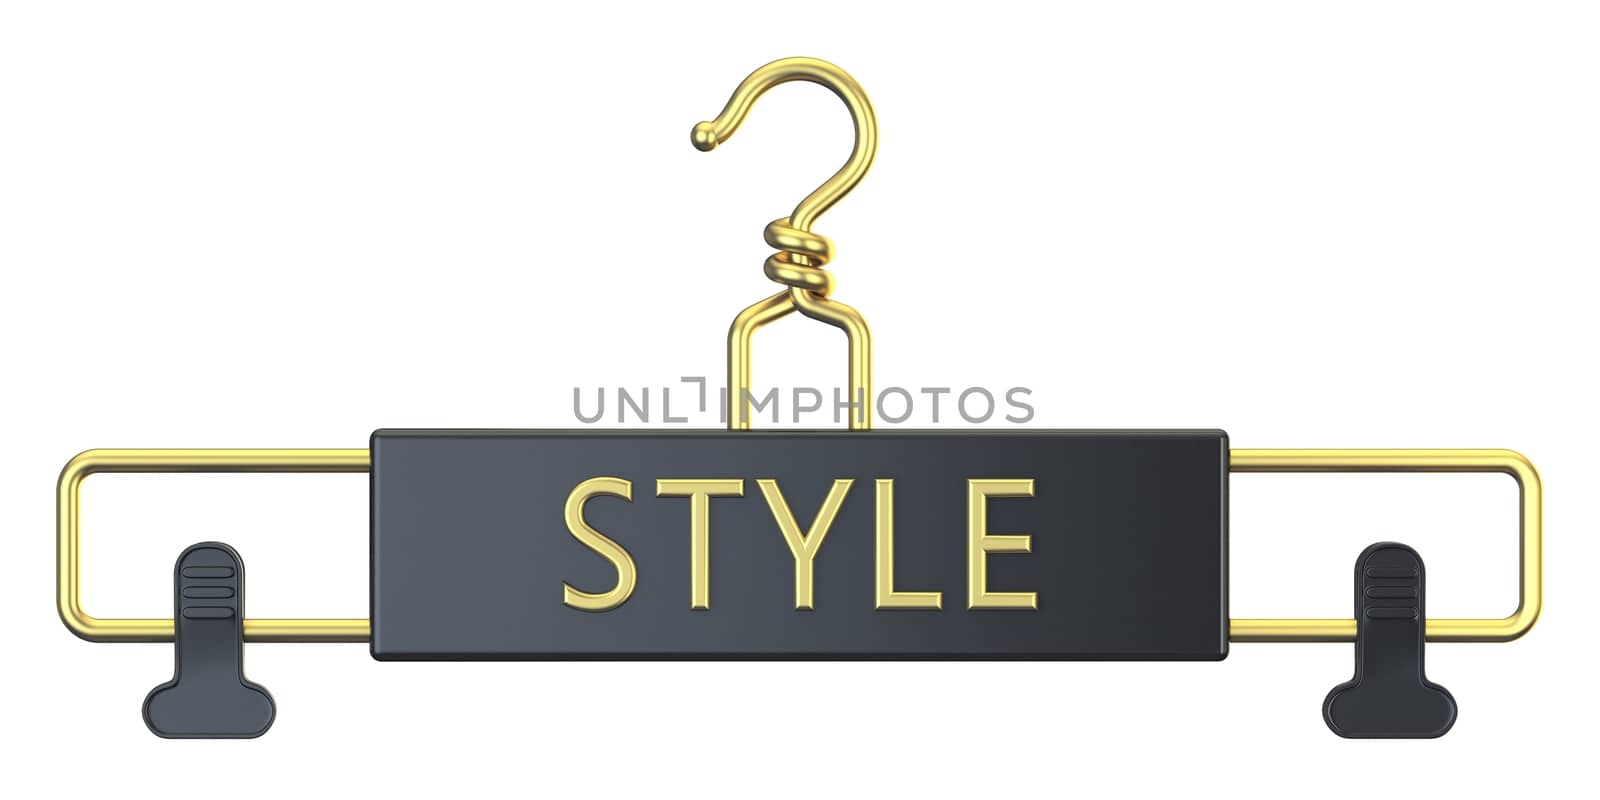 Black cloth hanger with STYLE text 3D render illustration isolated on white background